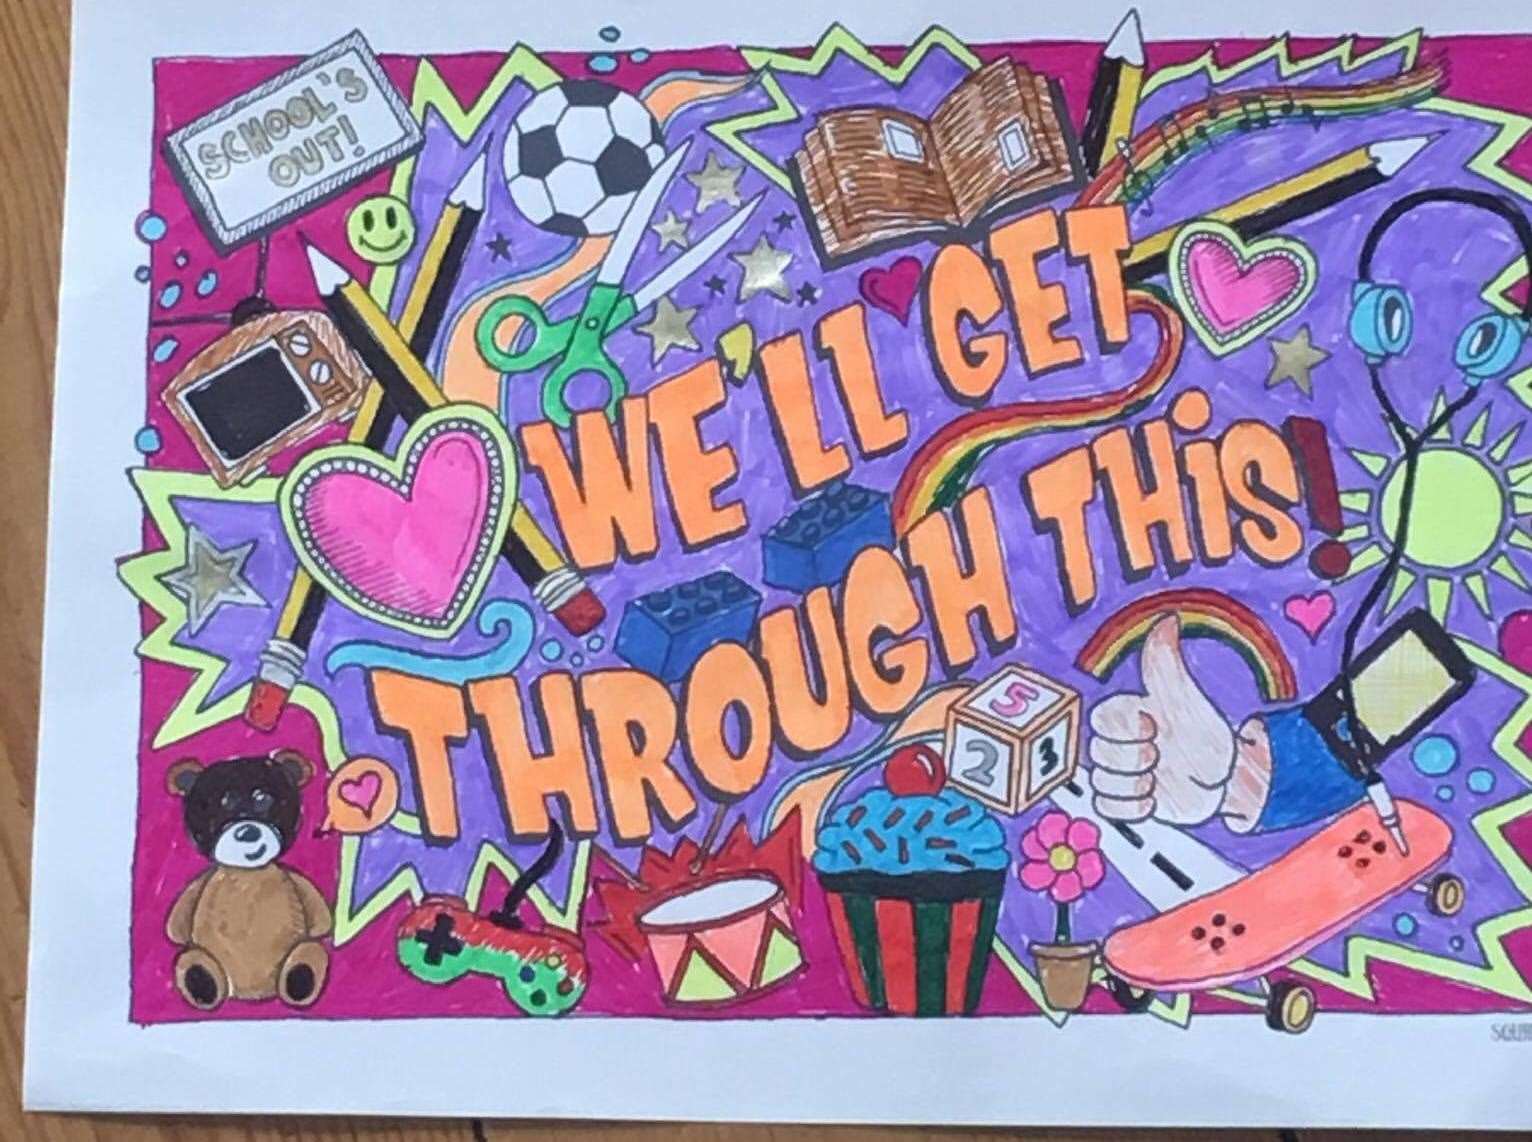 'We'll get through this' is the feel good message on one of the colouring sheets